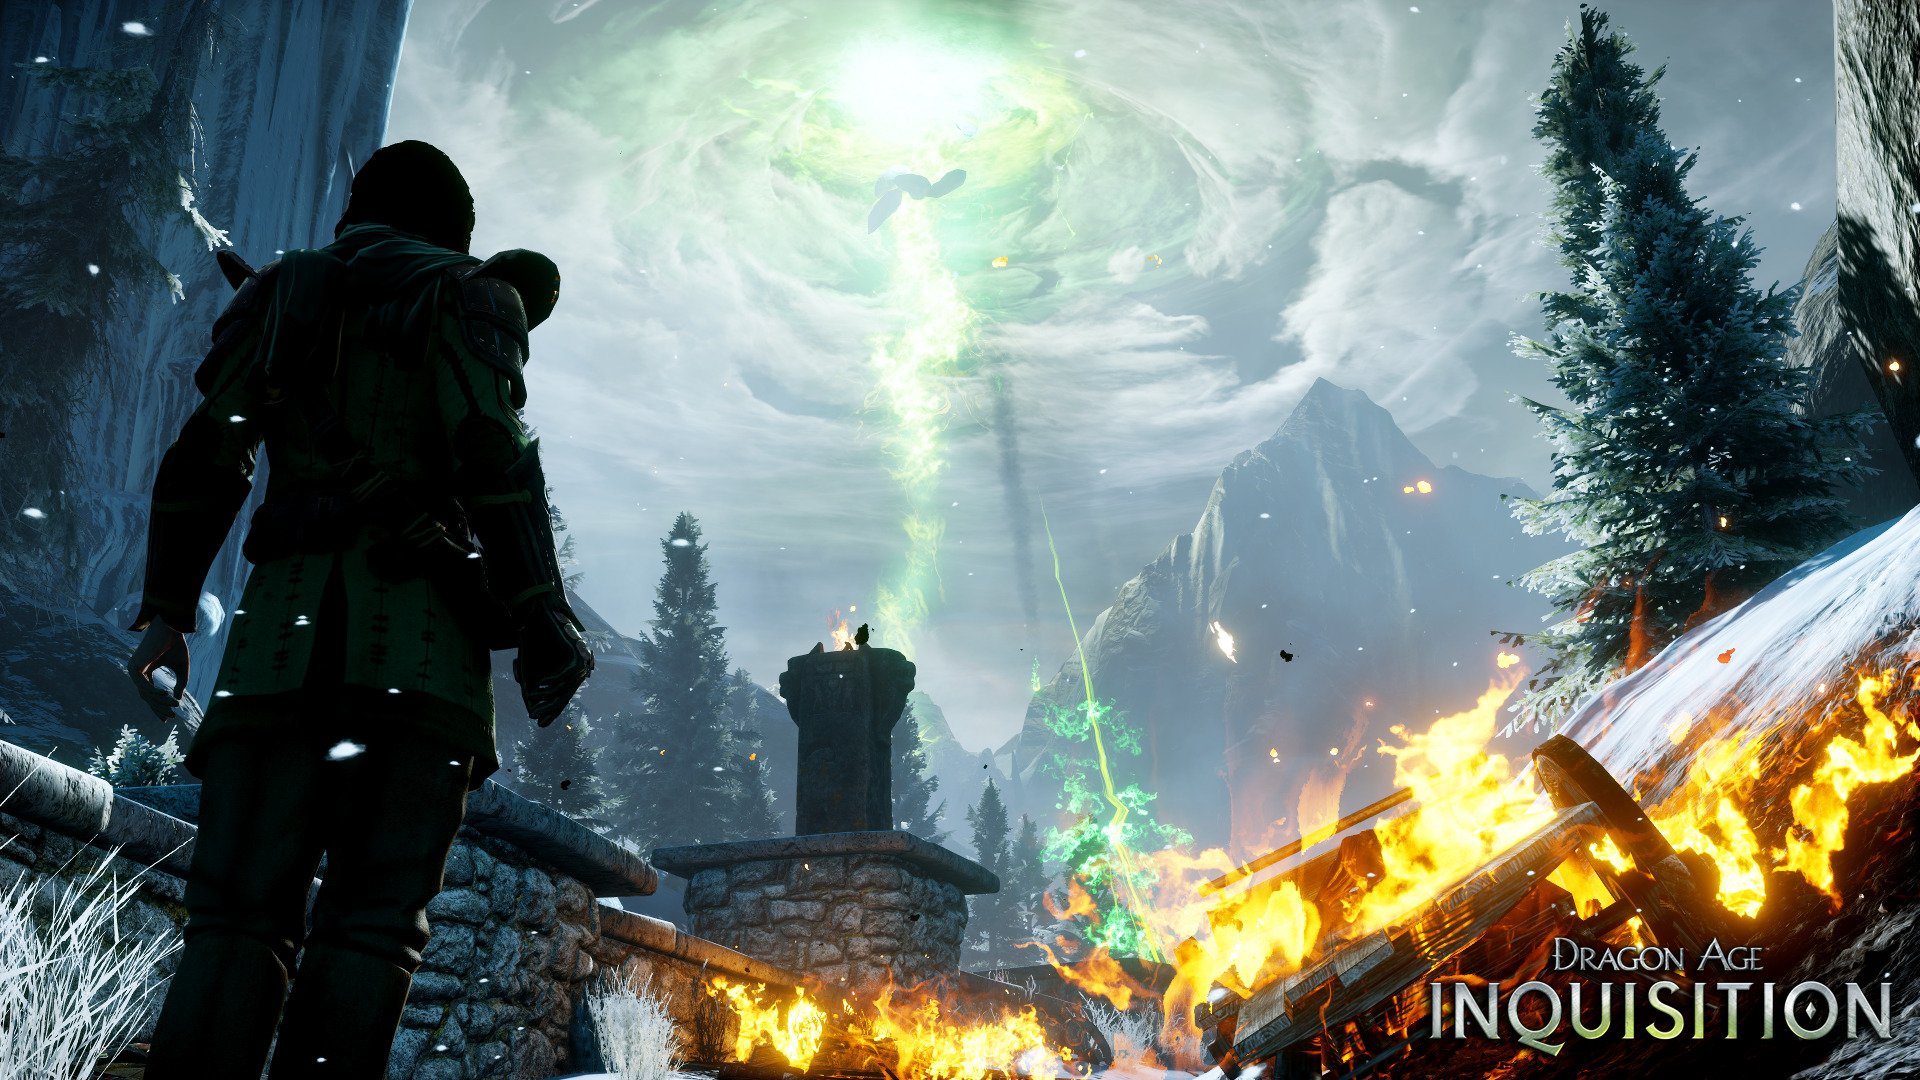 Video Game Dragon Age Inquisition 1920x1080